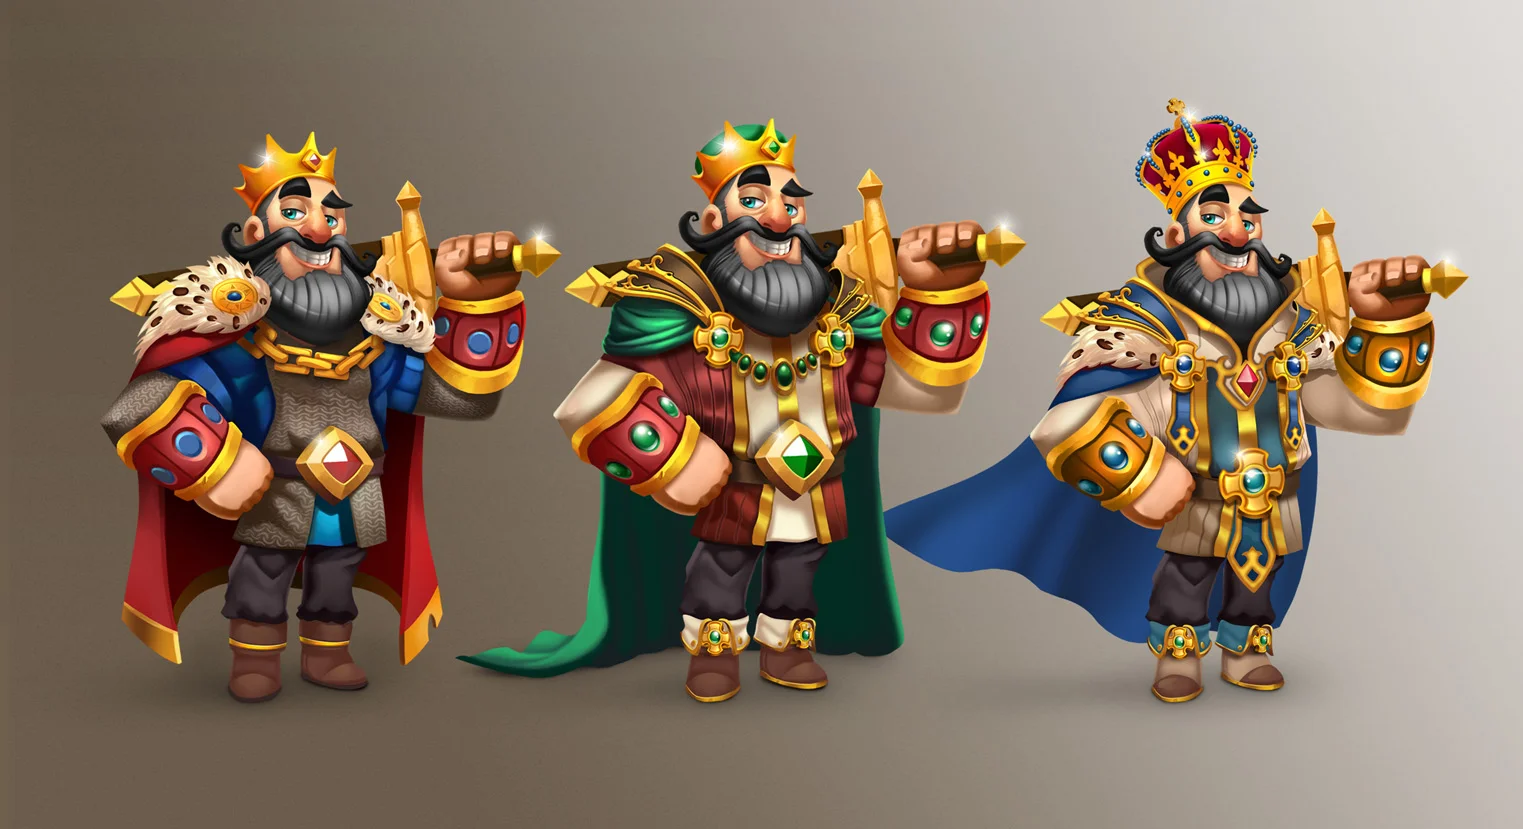 King Character Design in 3 Levels